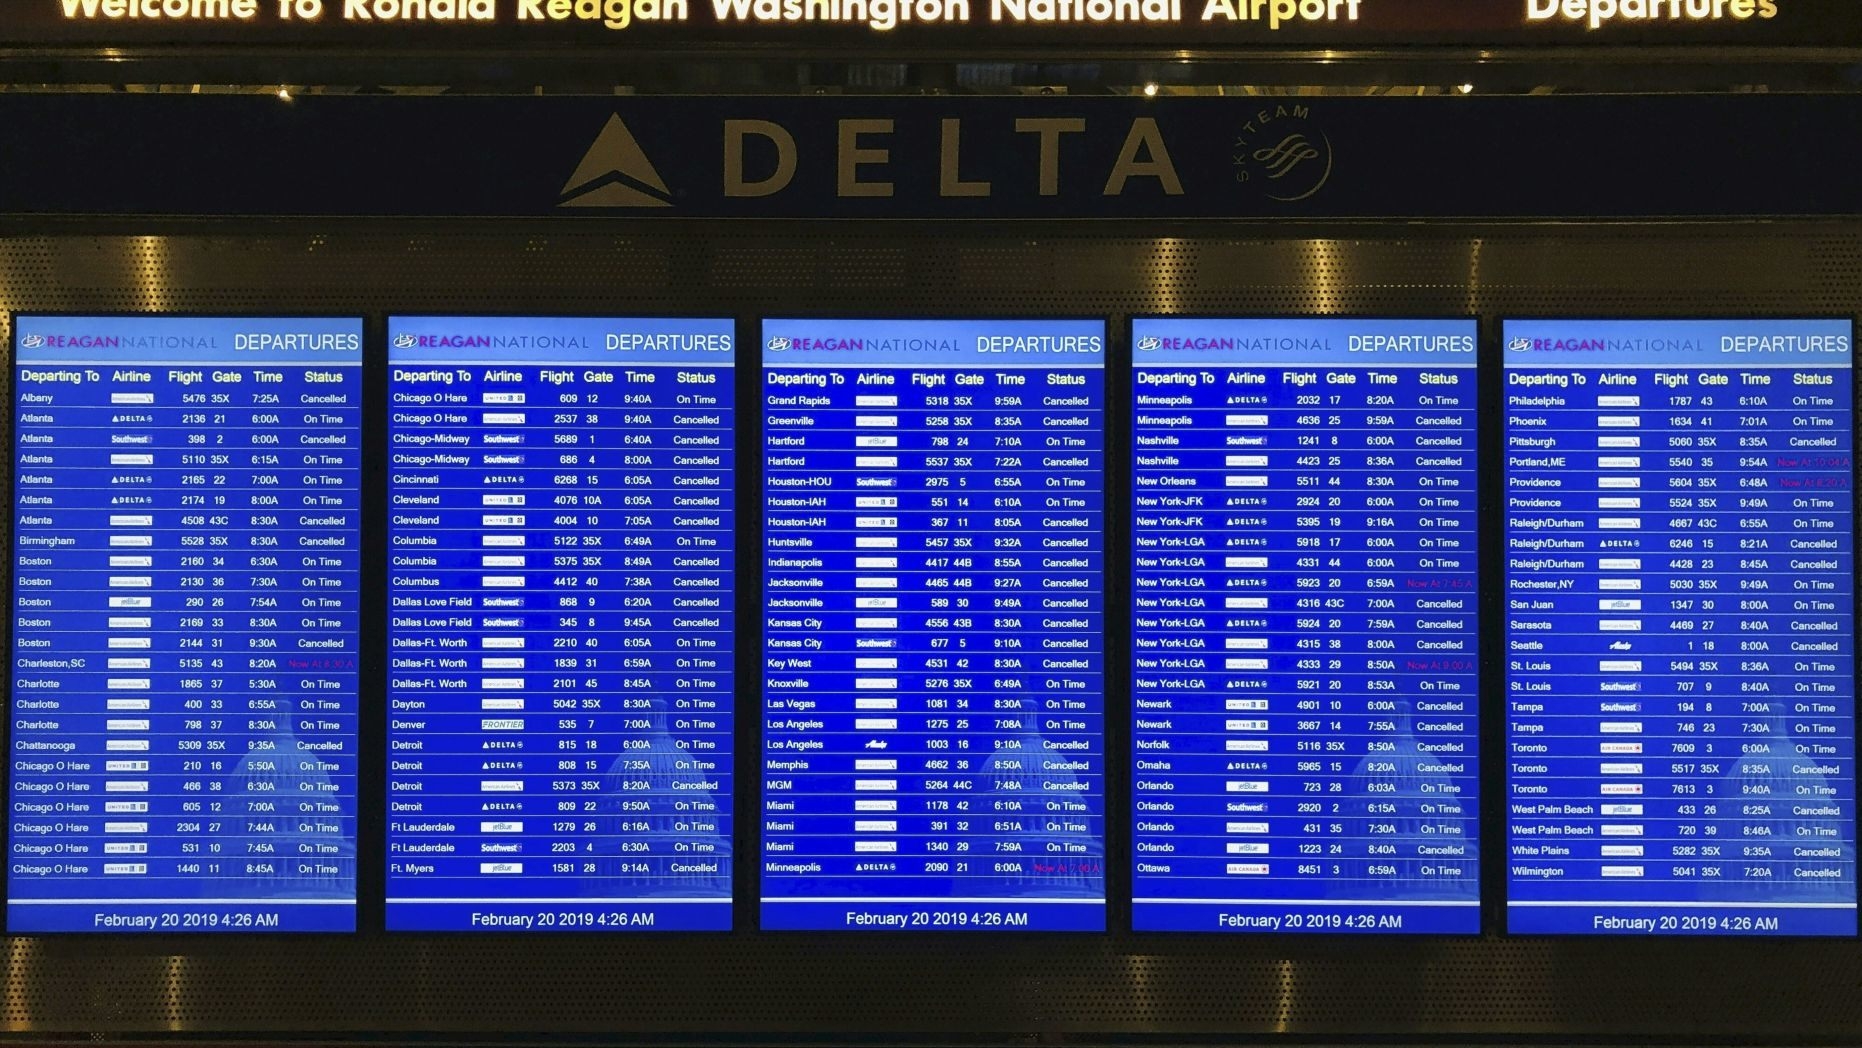 Winter storms: Airlines cancel more than 1,400 flights, issue waivers amid severe weather